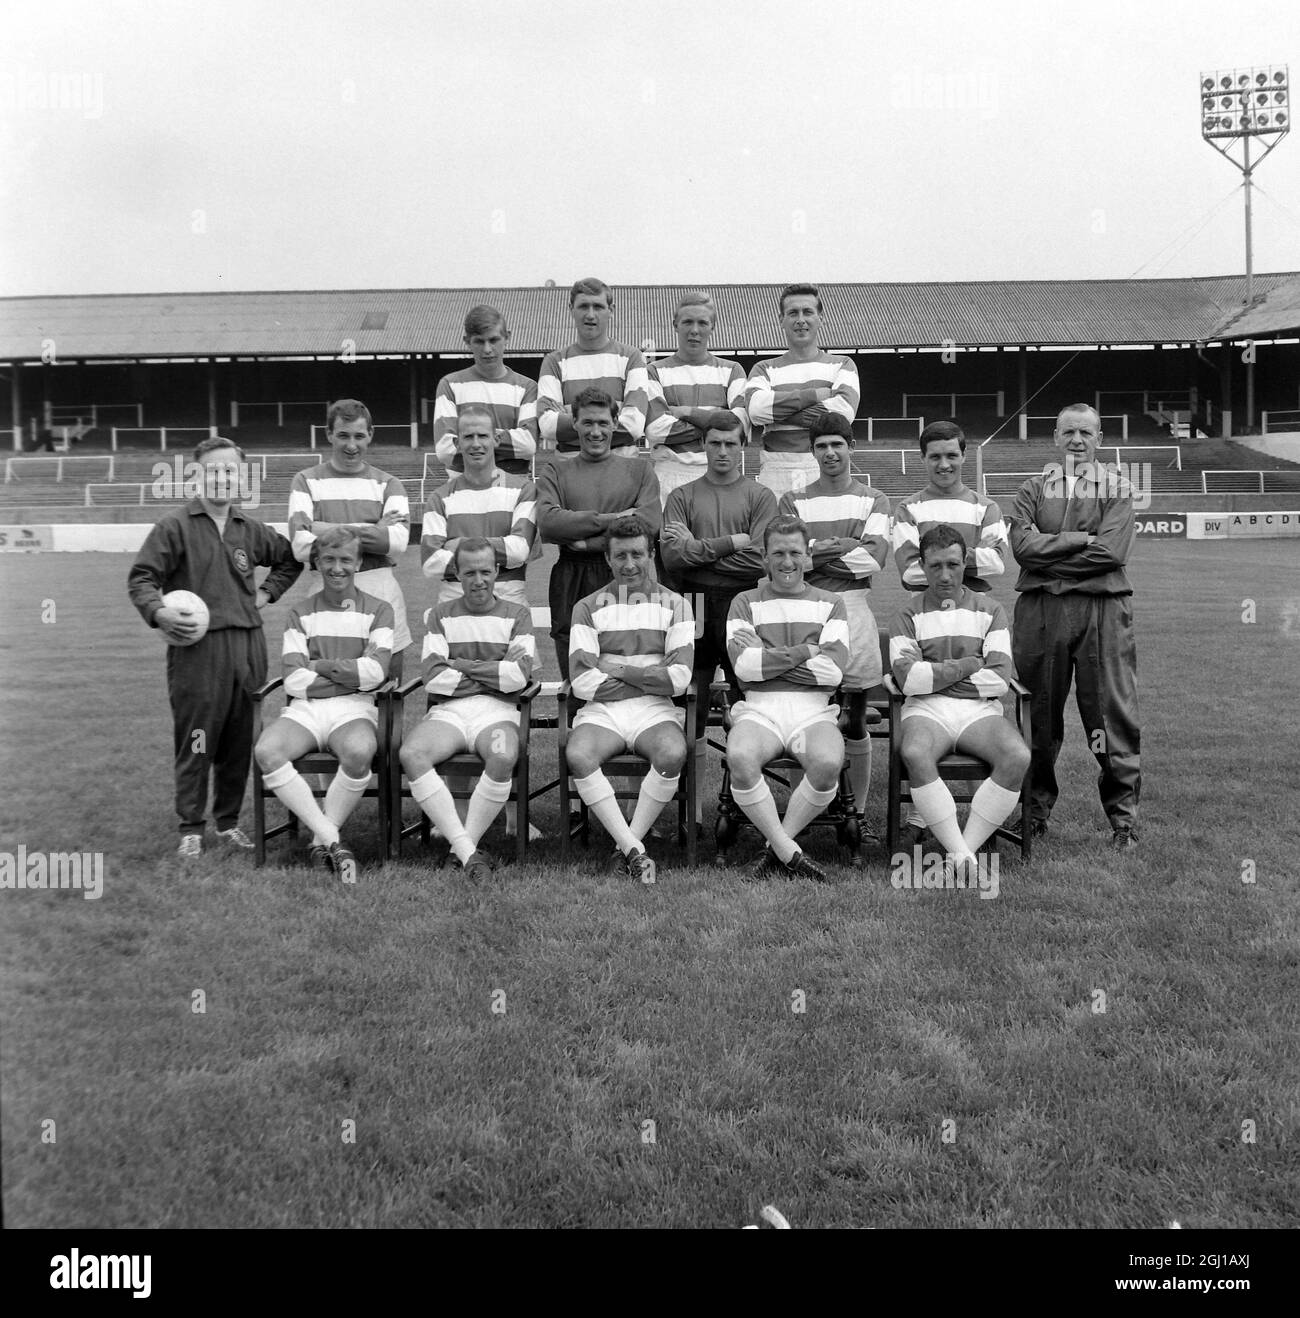 FOOTBALLERS OF QUEENS PARK RANGERS FC FOOTBALL CLUB IN LONDON ; 21 JULY 1964 Stock Photo